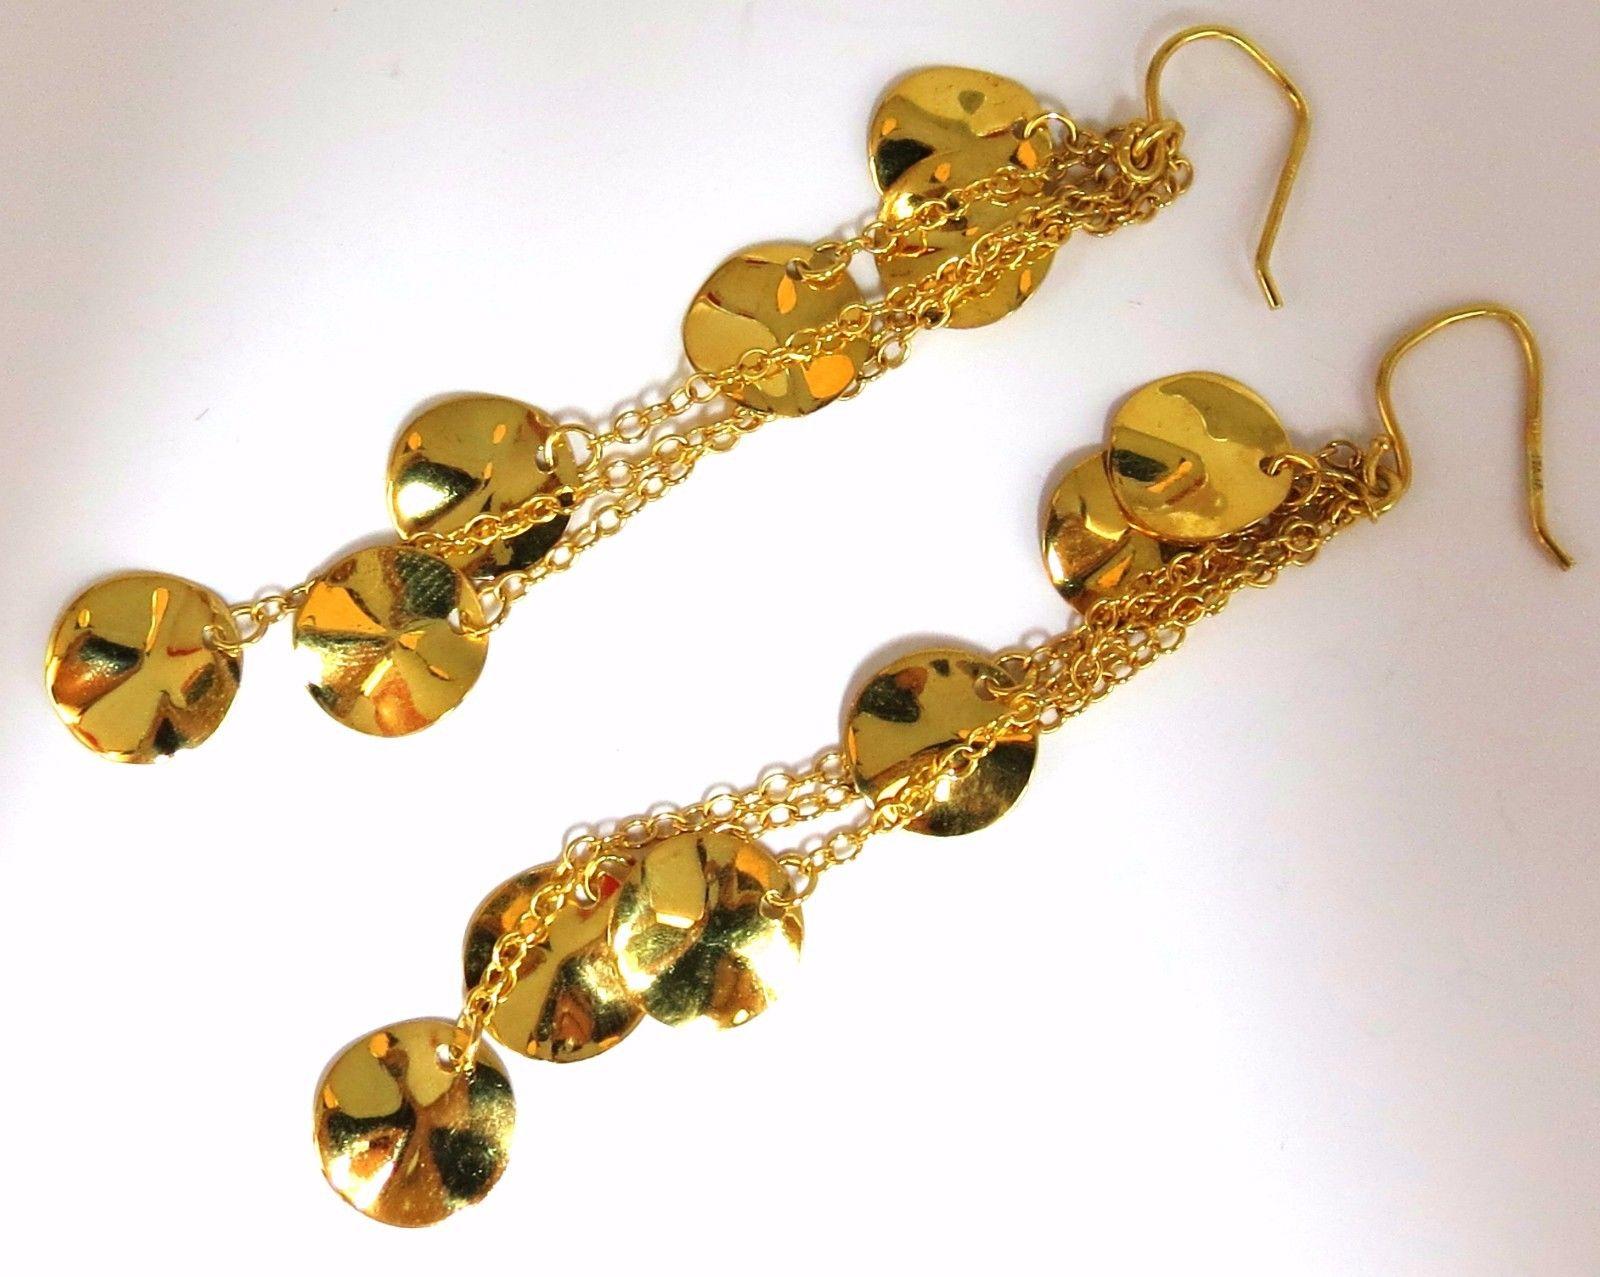 12 Dangling gold petals earrings

High Polish finish 

Measurements of Earrings:

3 Inches long

Each Petal: 9.7mm

18kt. yellow gold

European wire wear

5.9 Grams

Earrings are gorgeous handmade